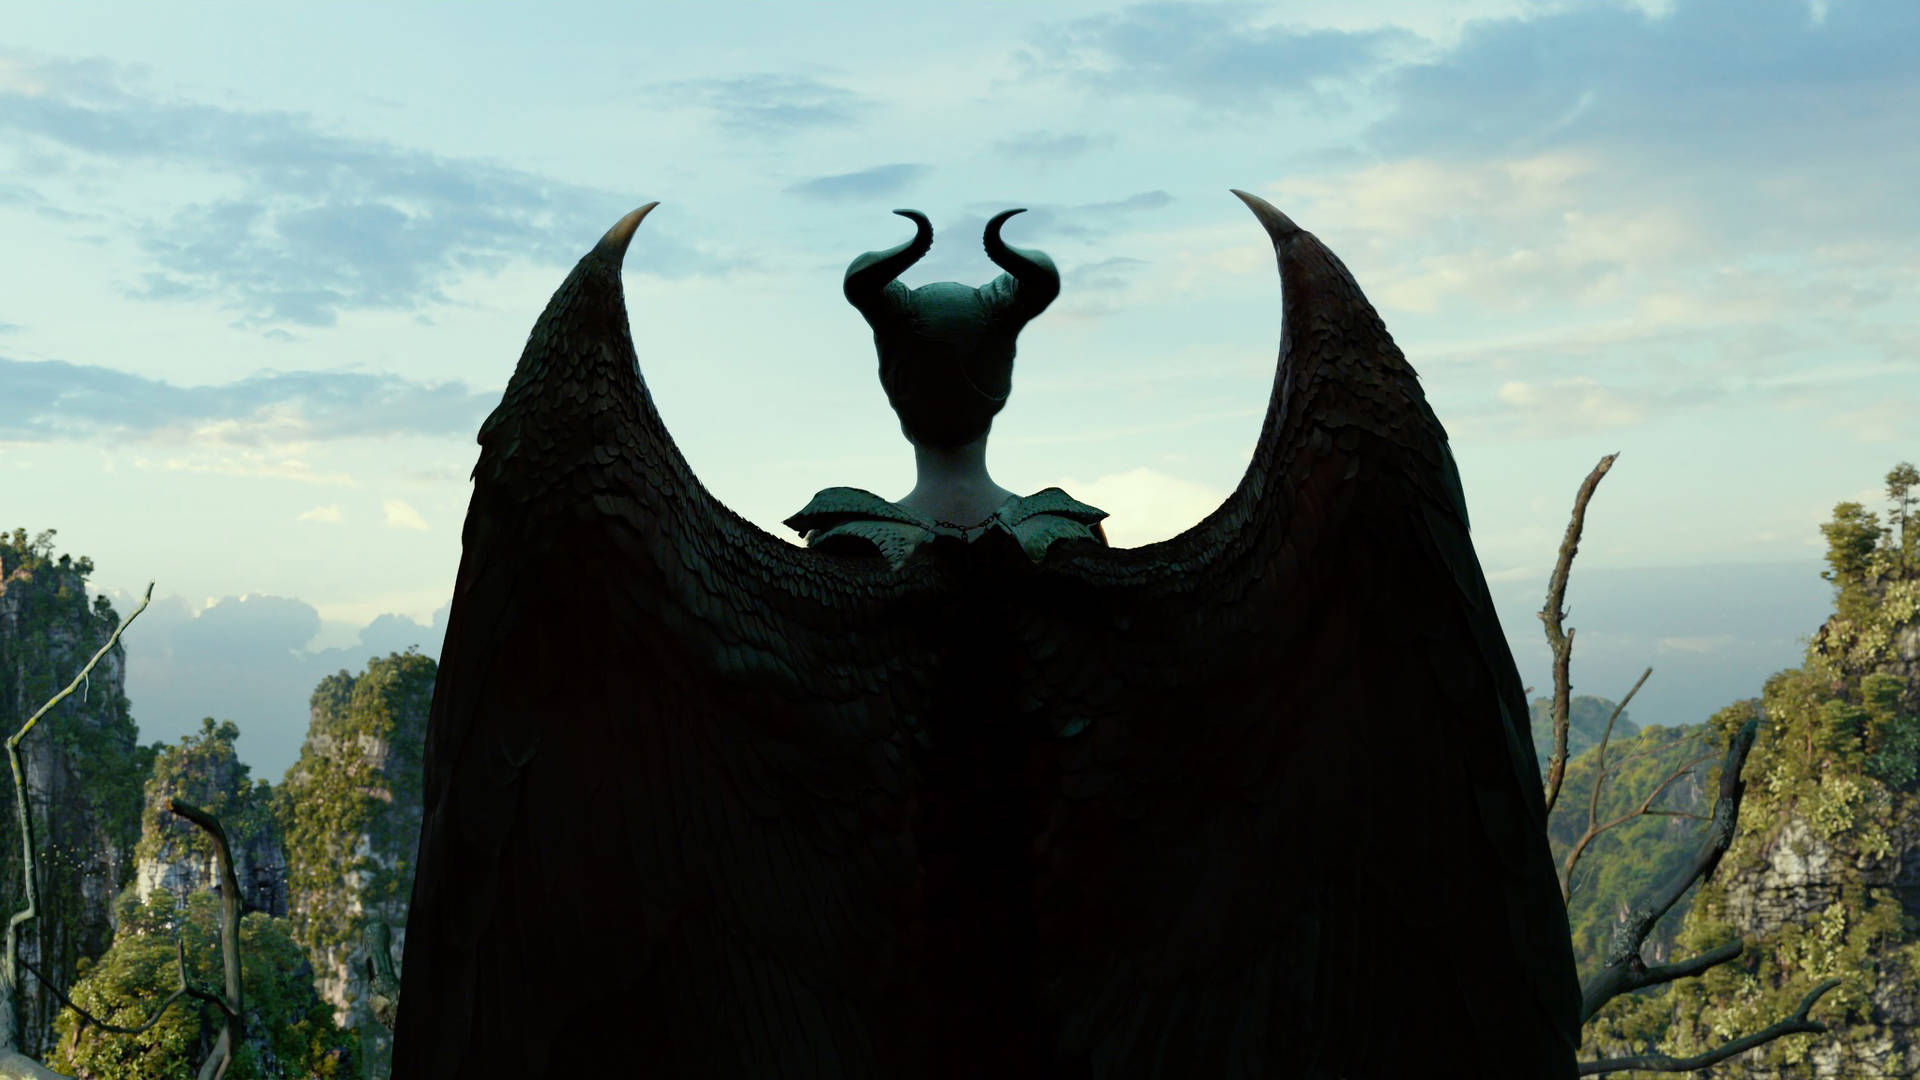 Maleficent Wallpapers